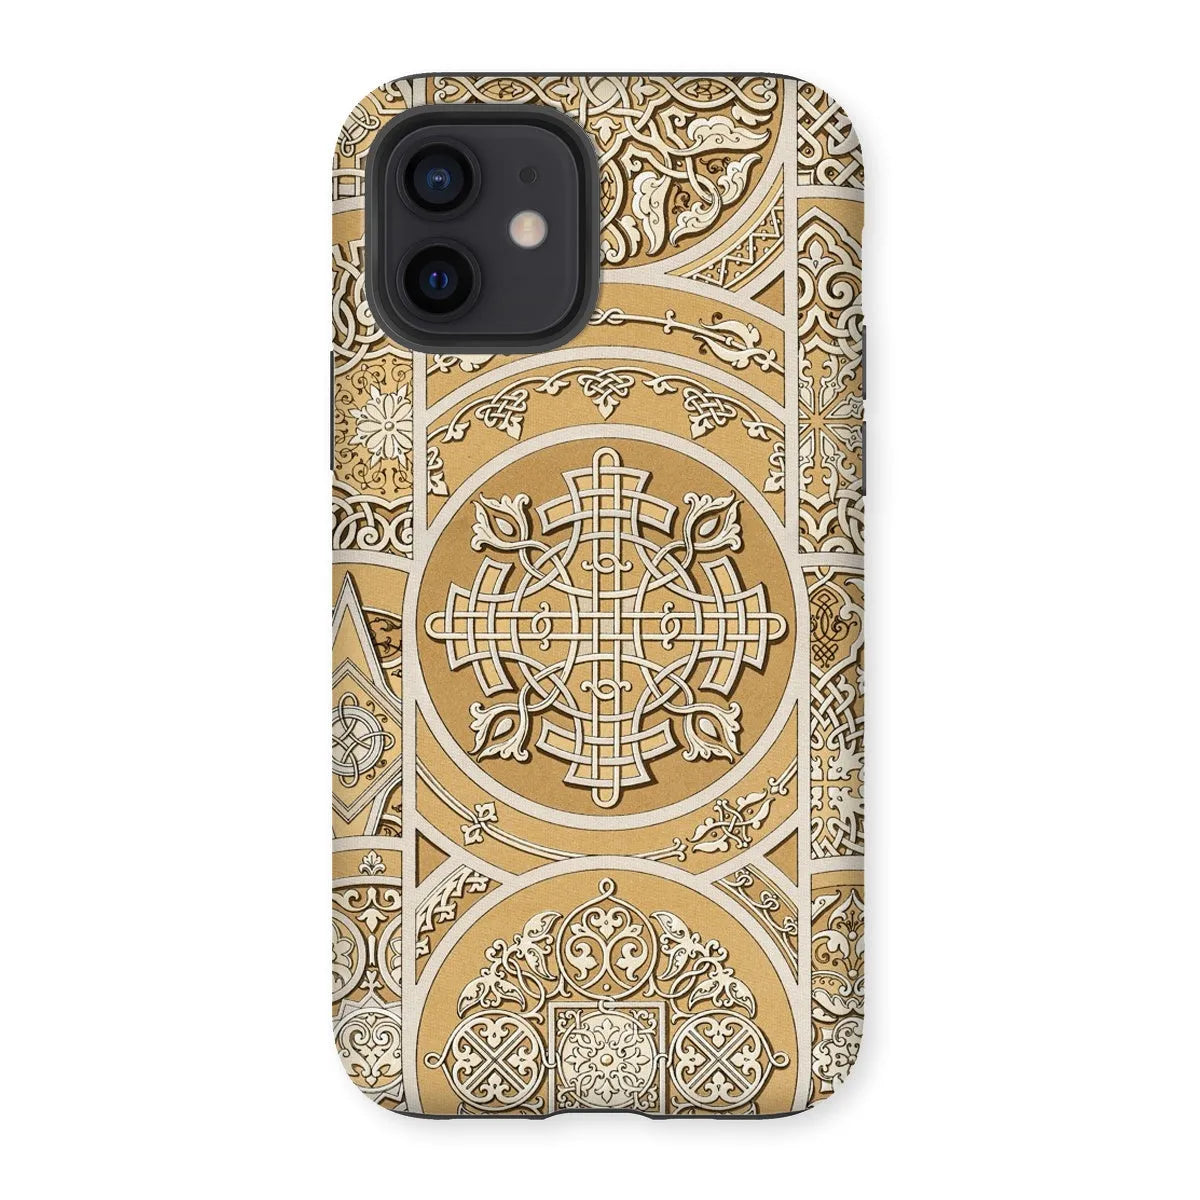 Russian Pattern By Auguste Racinet Tough Phone Case - Iphone 12 / Matte - Mobile Phone Cases - Aesthetic Art